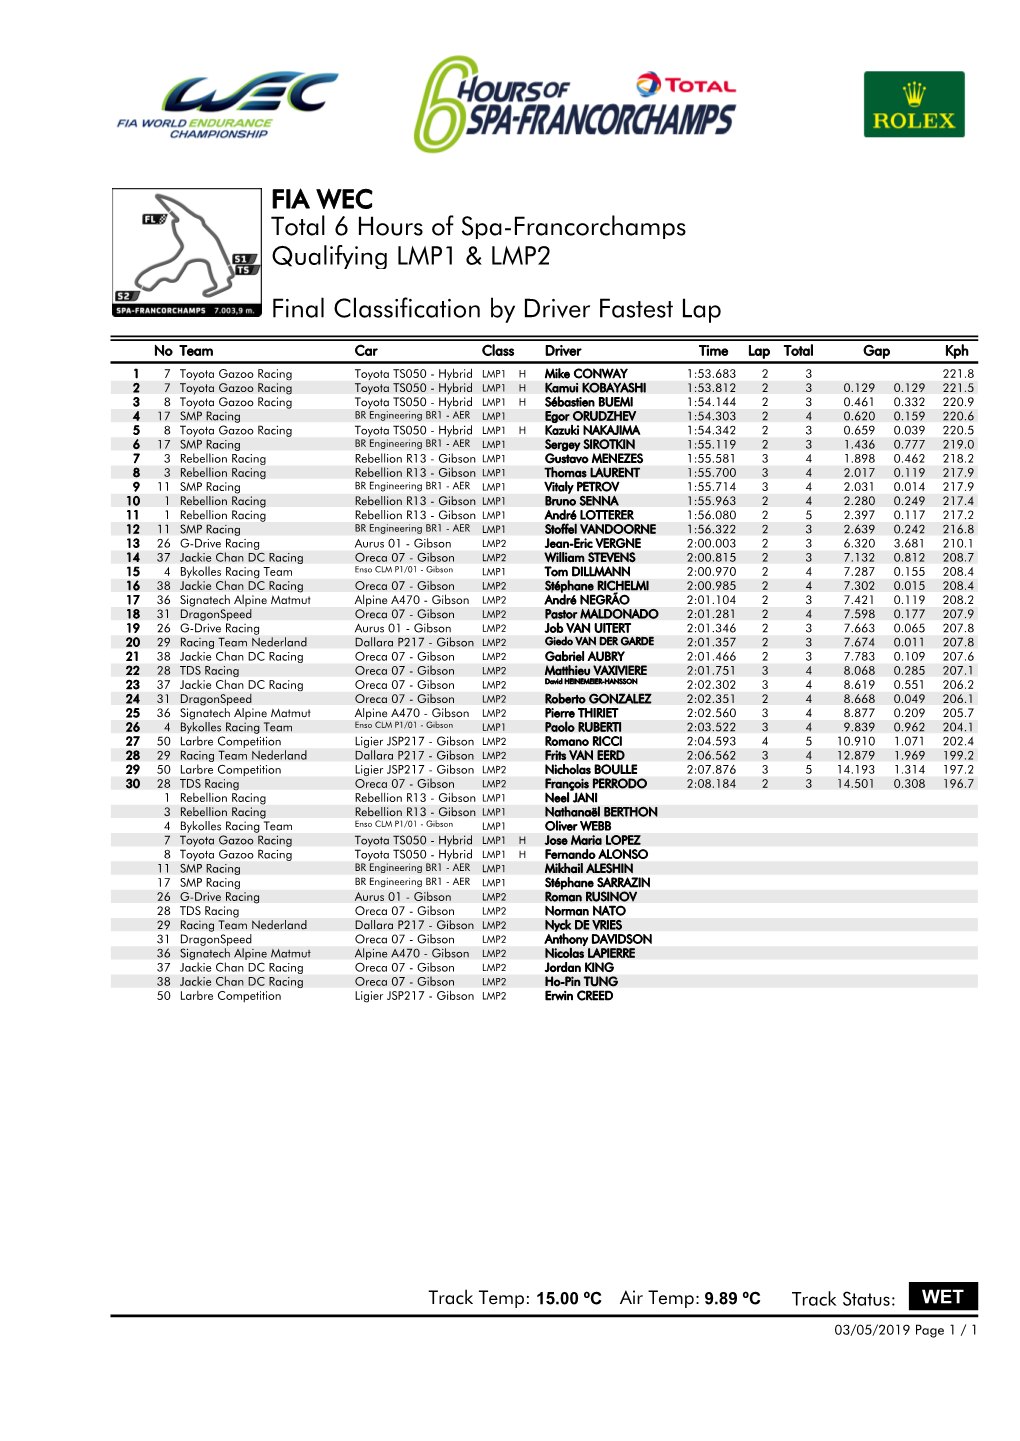 Final Classification by Driver Fastest Lap Qualifying LMP1 & LMP2 Total